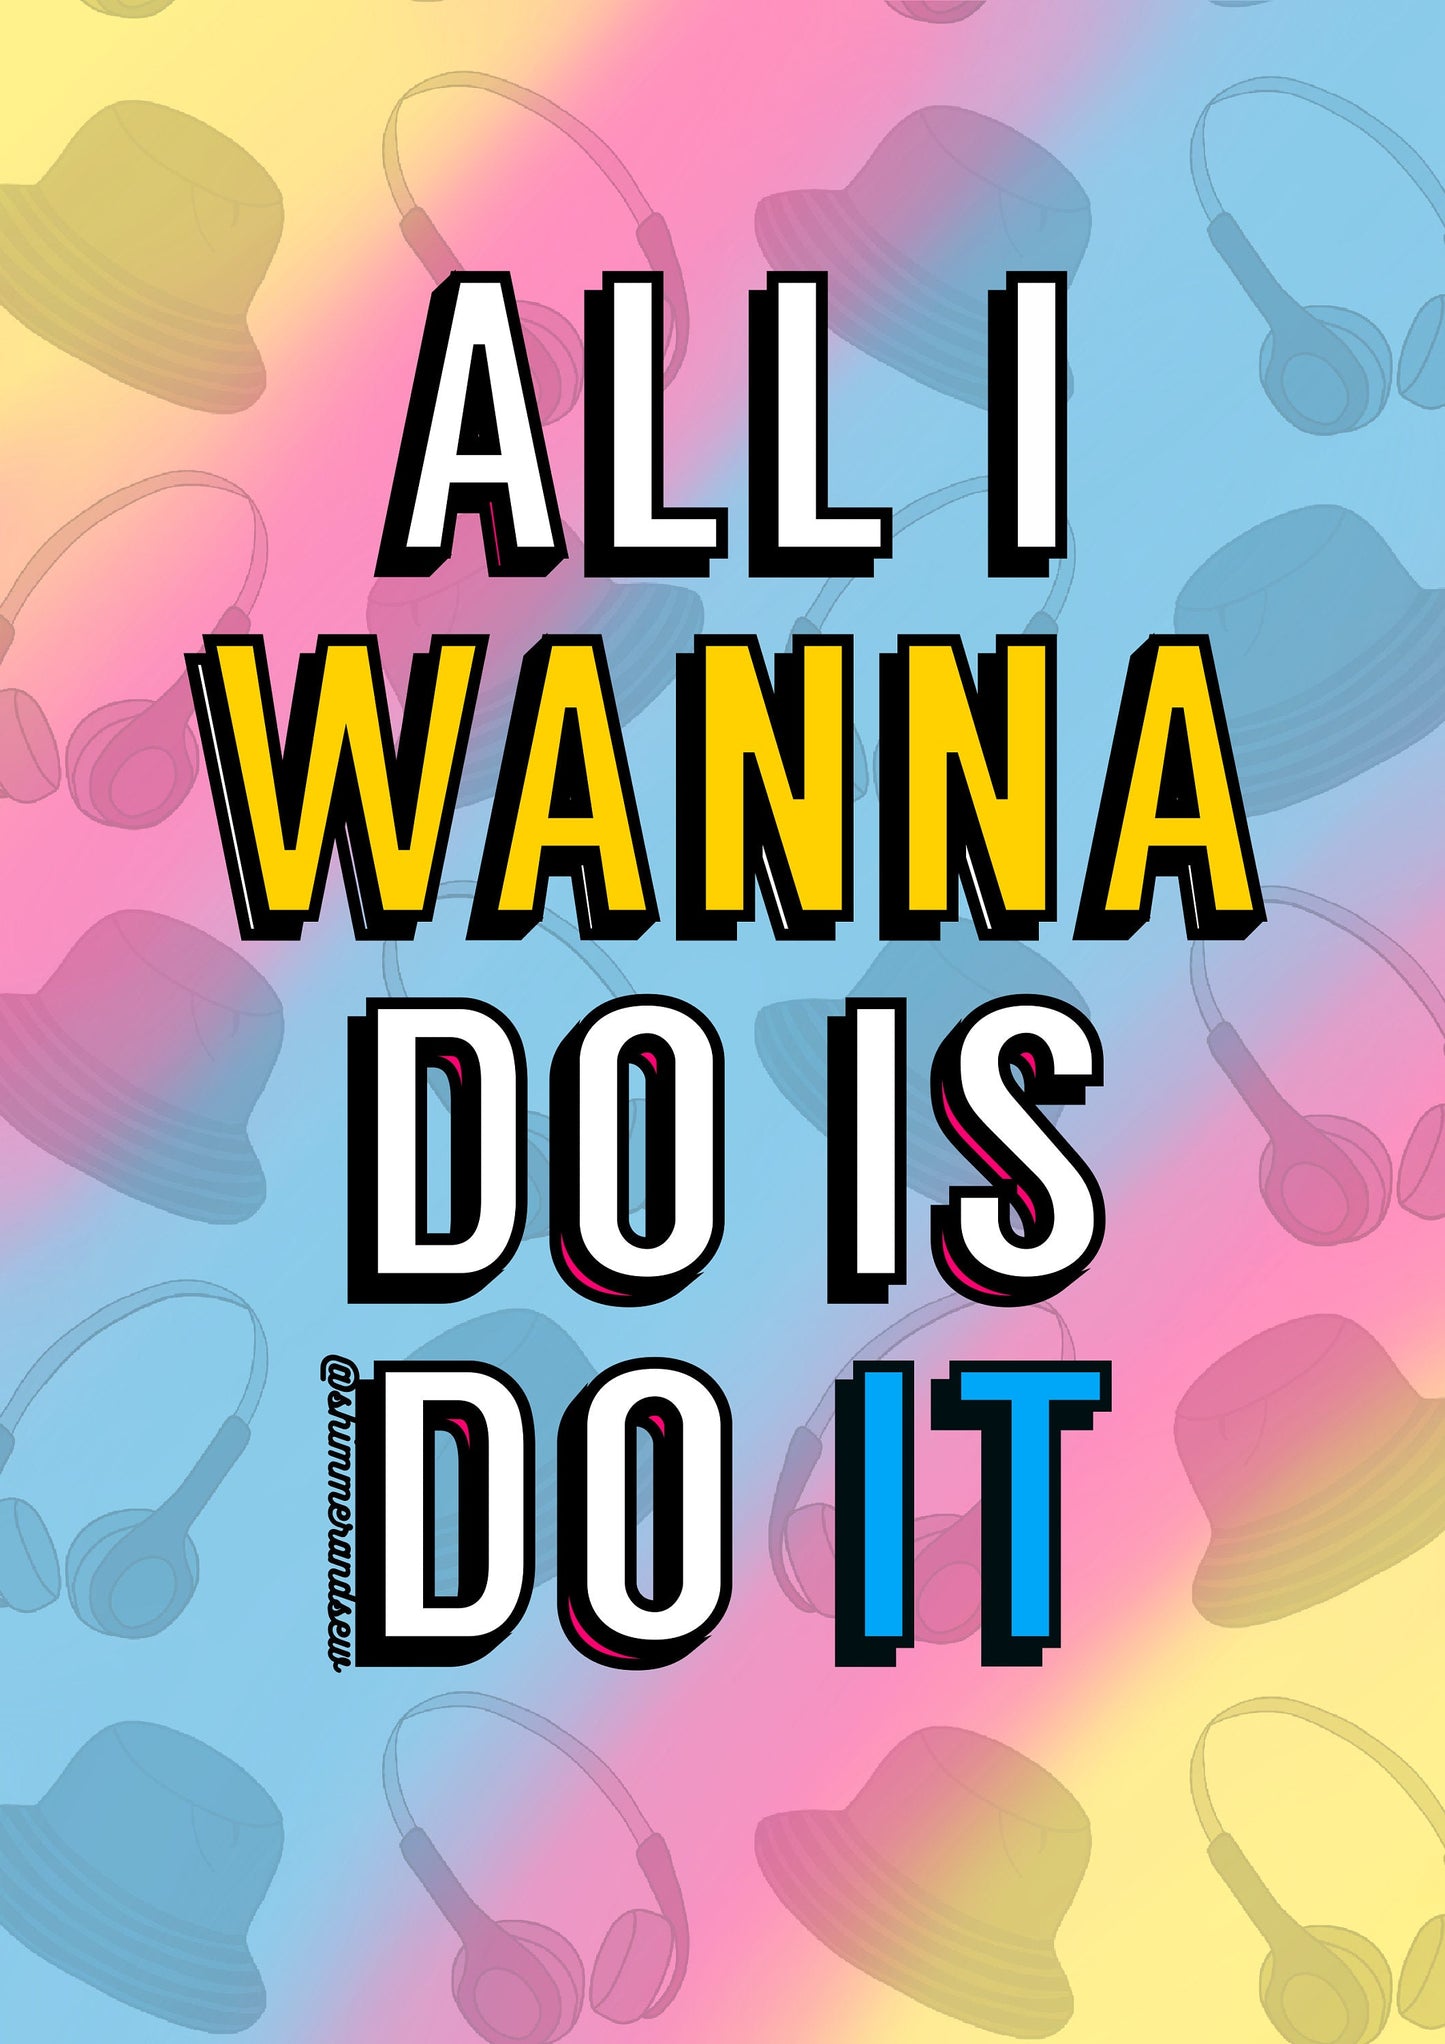 All I Wanna Do Is Do It - Kevin and Perry - seconds